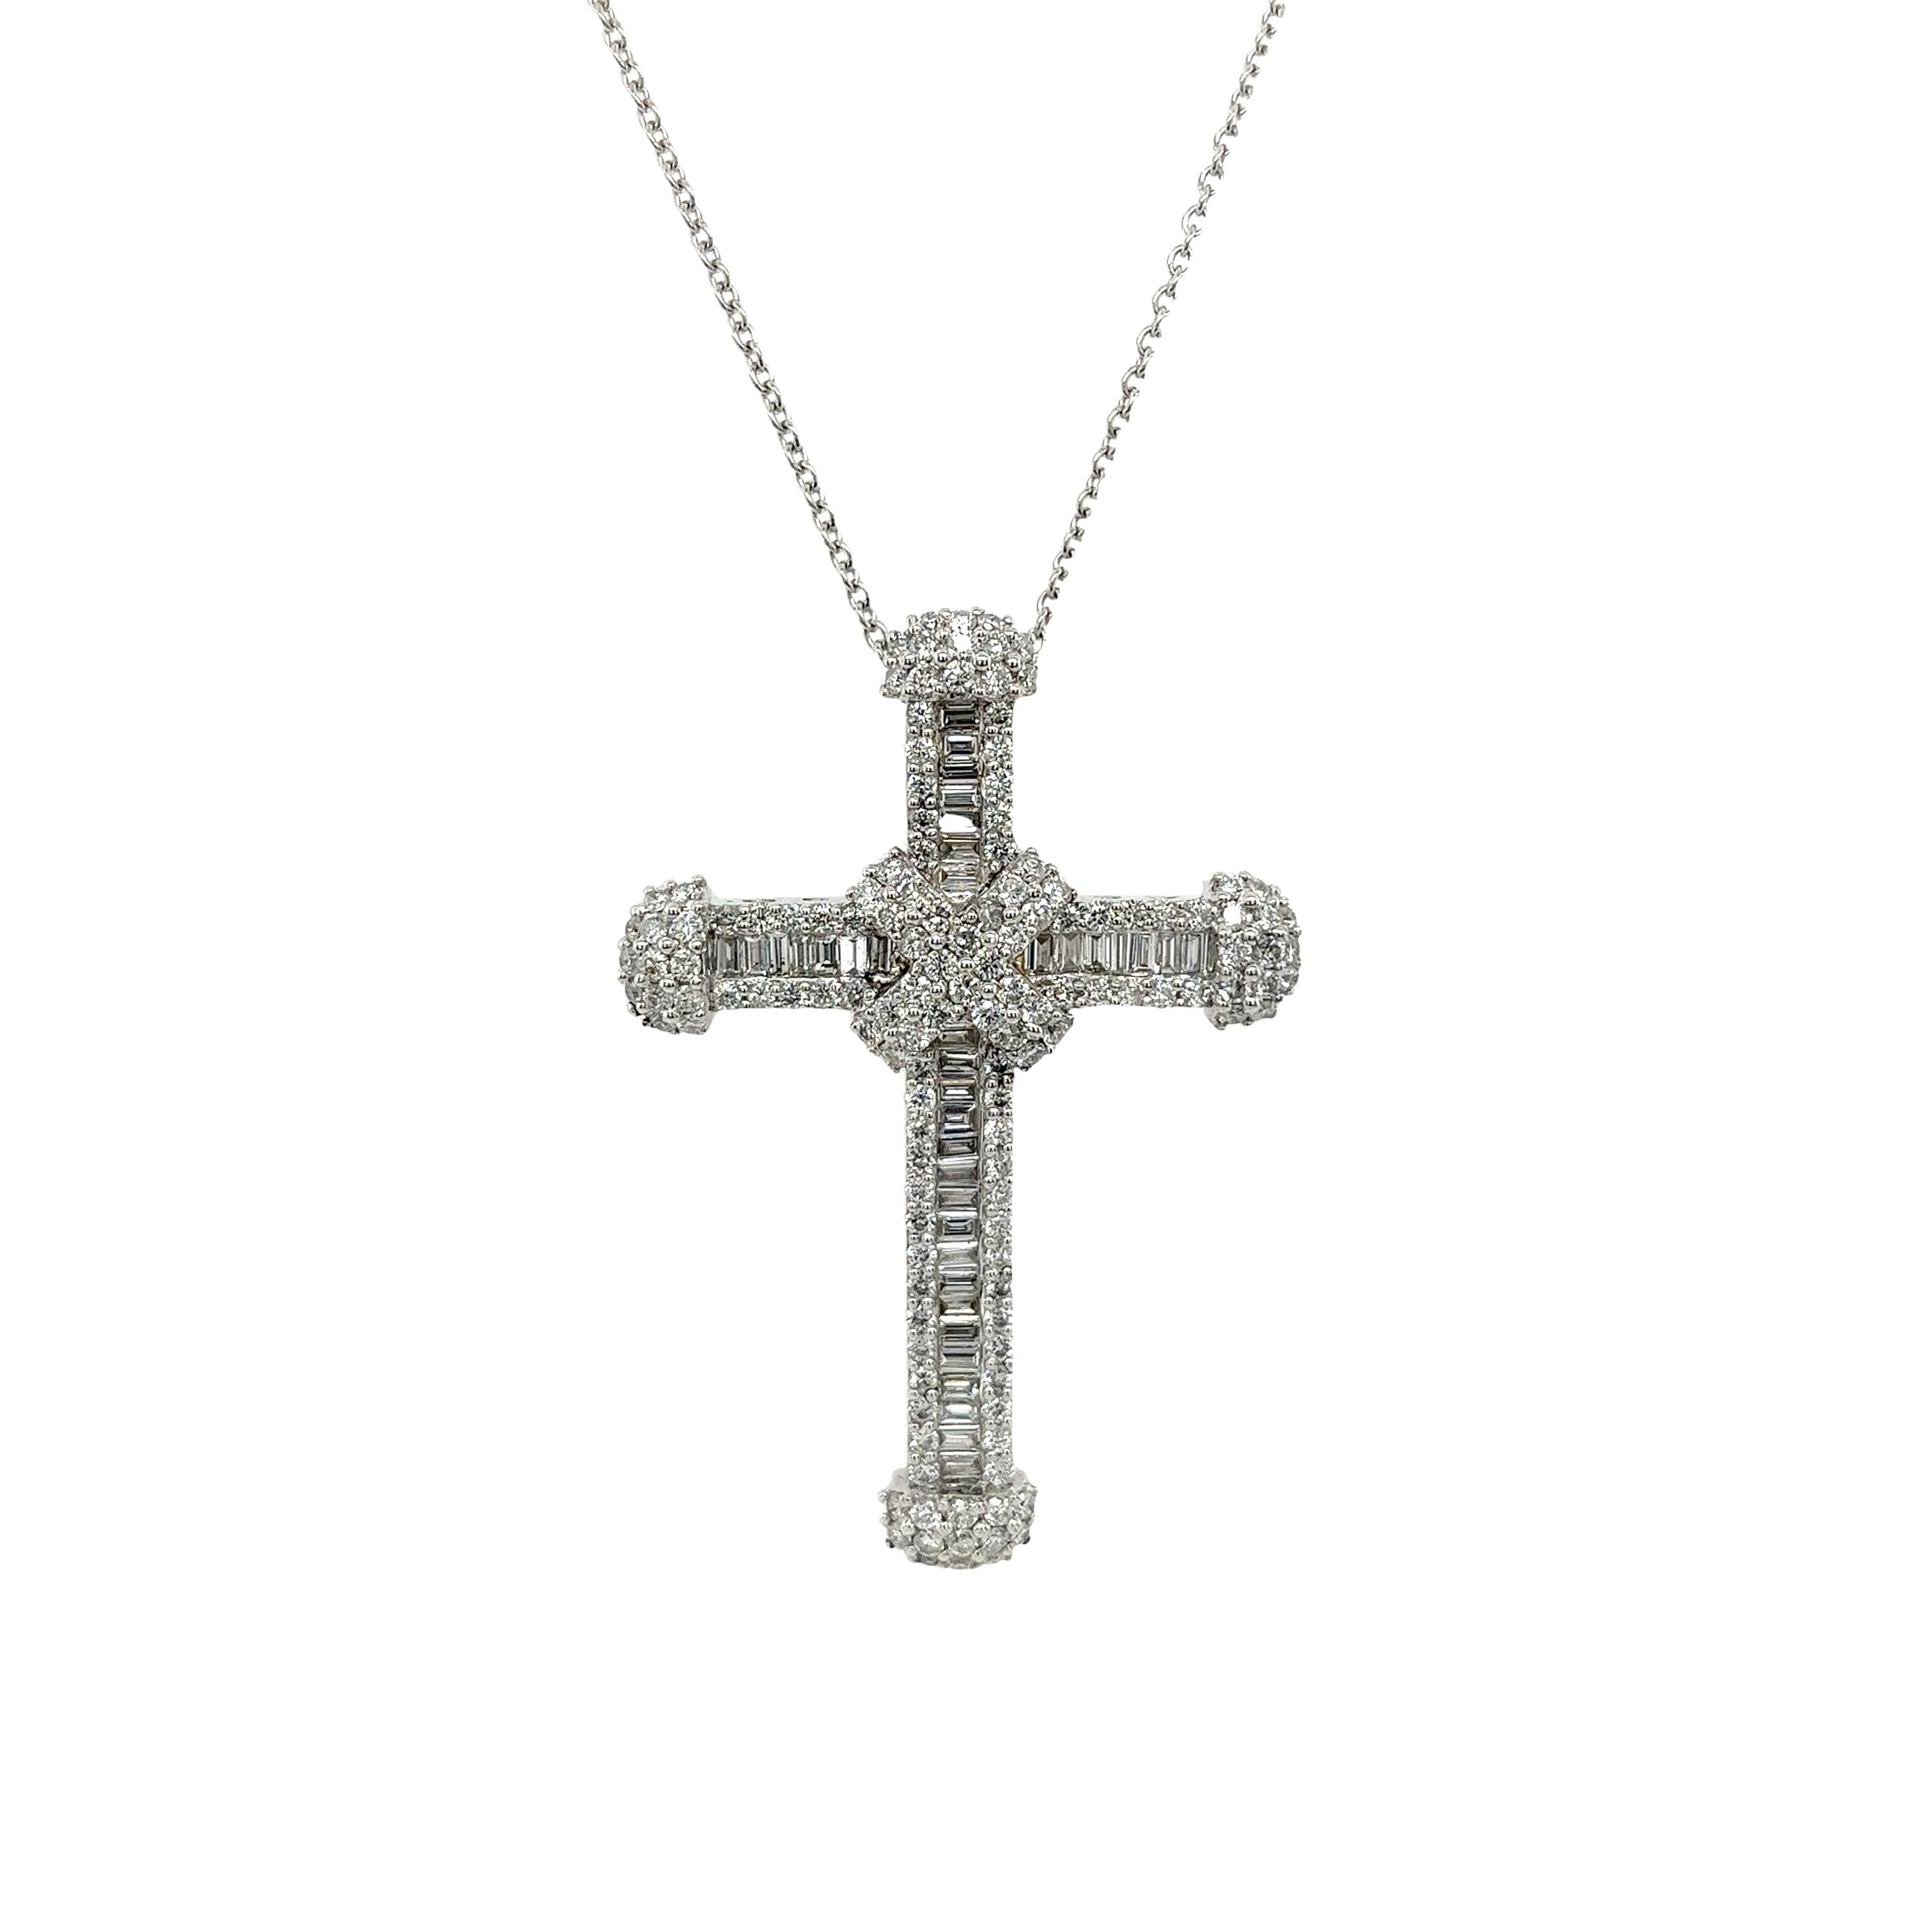 This cross pendant is set with 1.50ct natural round brilliant cut and 1.0ct baguette diamonds G colour & VS1 clarity in a beautiful setting. In 18ct white gold, and total length of the necklace is 18 inches. 

Total Diamond Weight: 2.50ct
Diamond